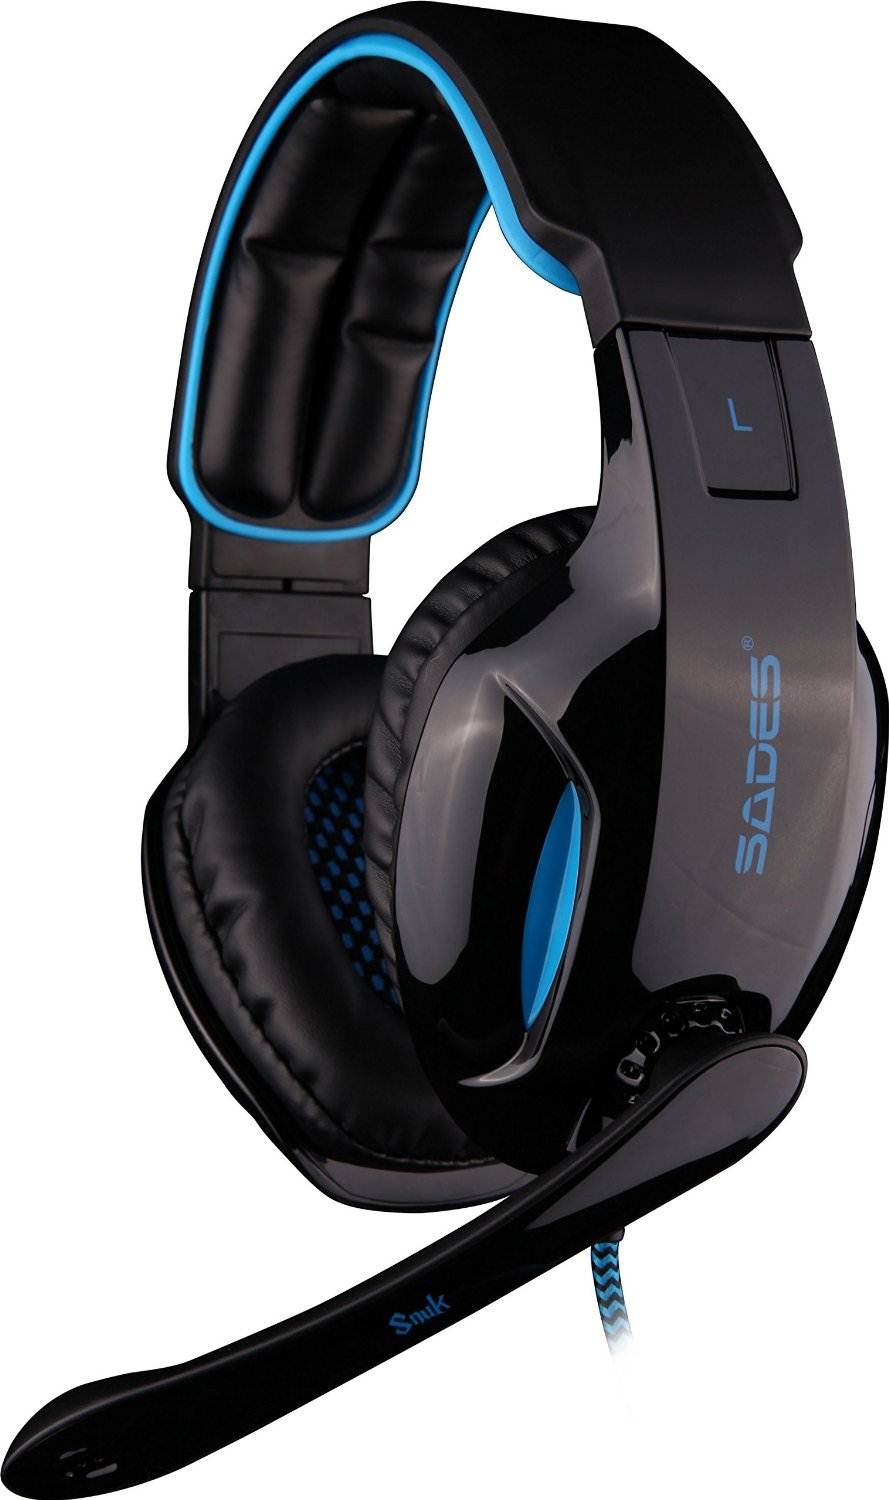 Sades Snuk Gaming Headphones Review and Specifications